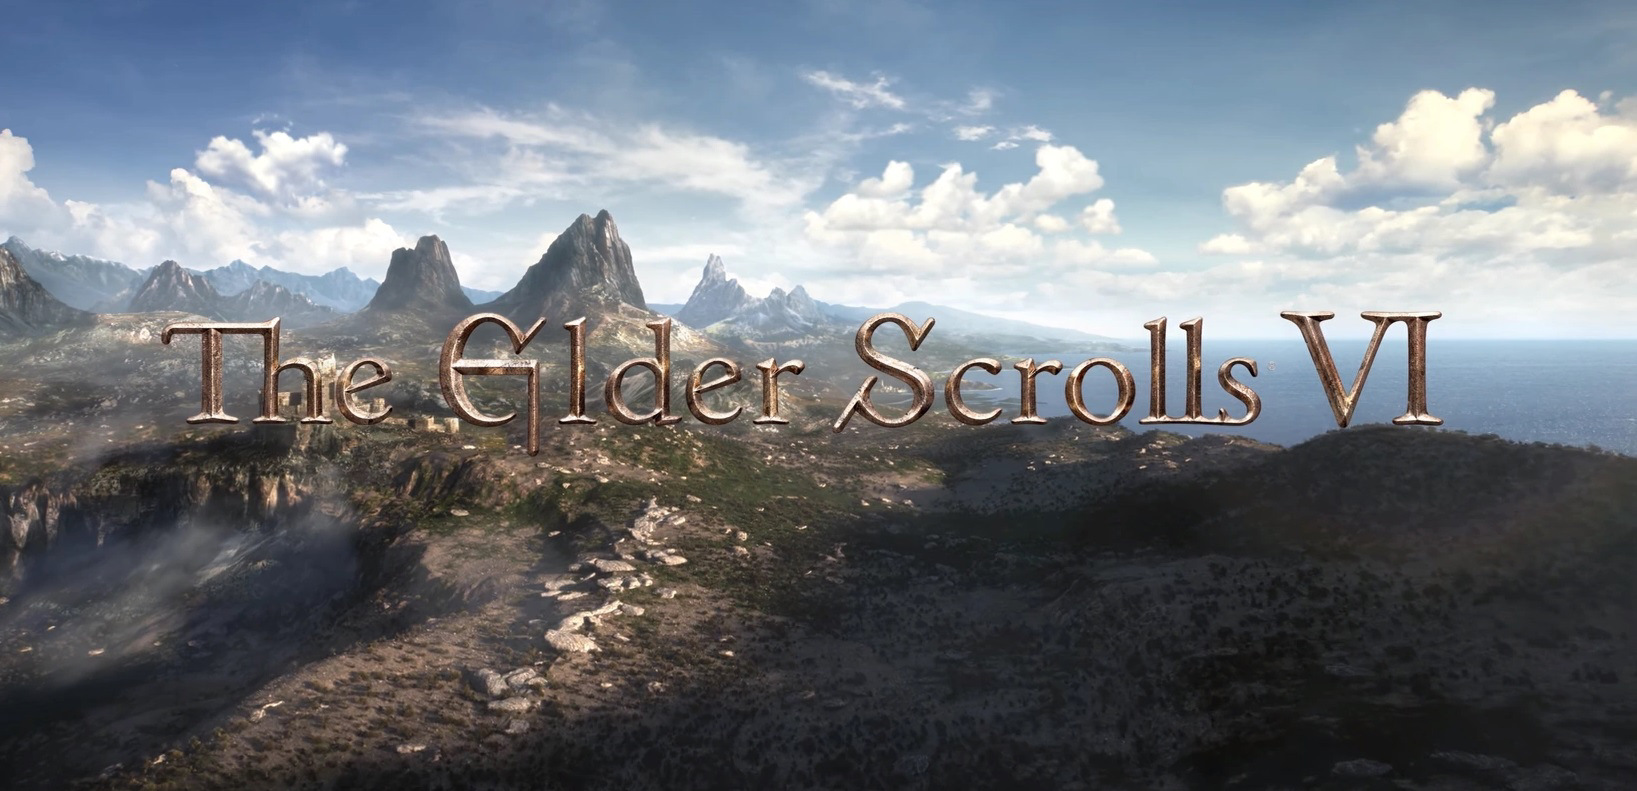 Xbox Boss Wishy-Washy on Whether The Elder Scrolls 6 Will Come to PS6, PS5